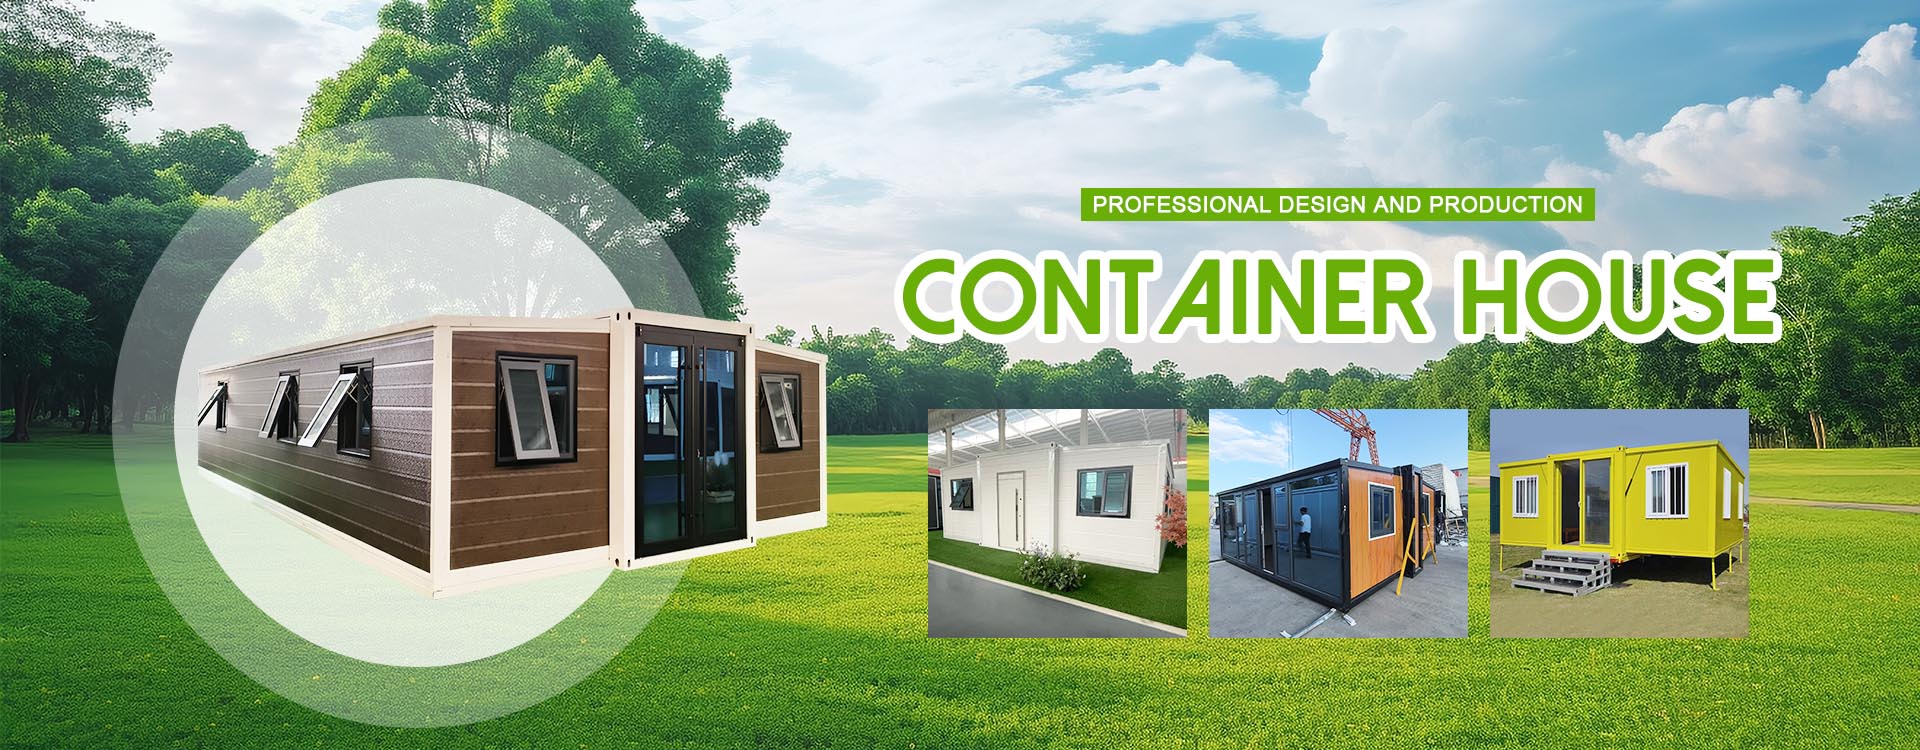 China Container House